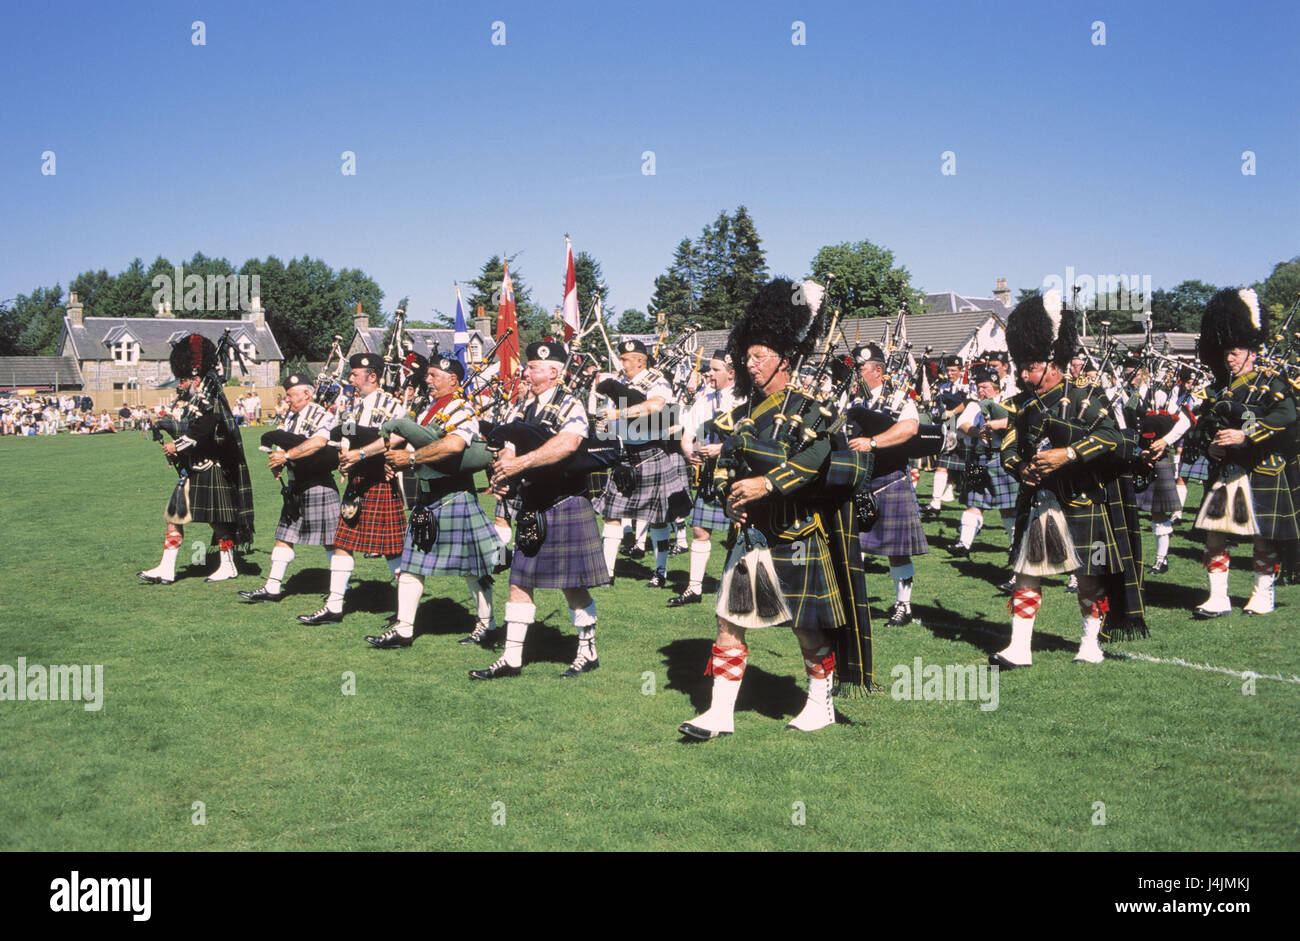 Great Britain, Scotland, highlands, pipers, save Europe, tradition, traditionally, in Scottish, musical instrument, wind instrument, bagpipes, music, march, clan, Stock Photo